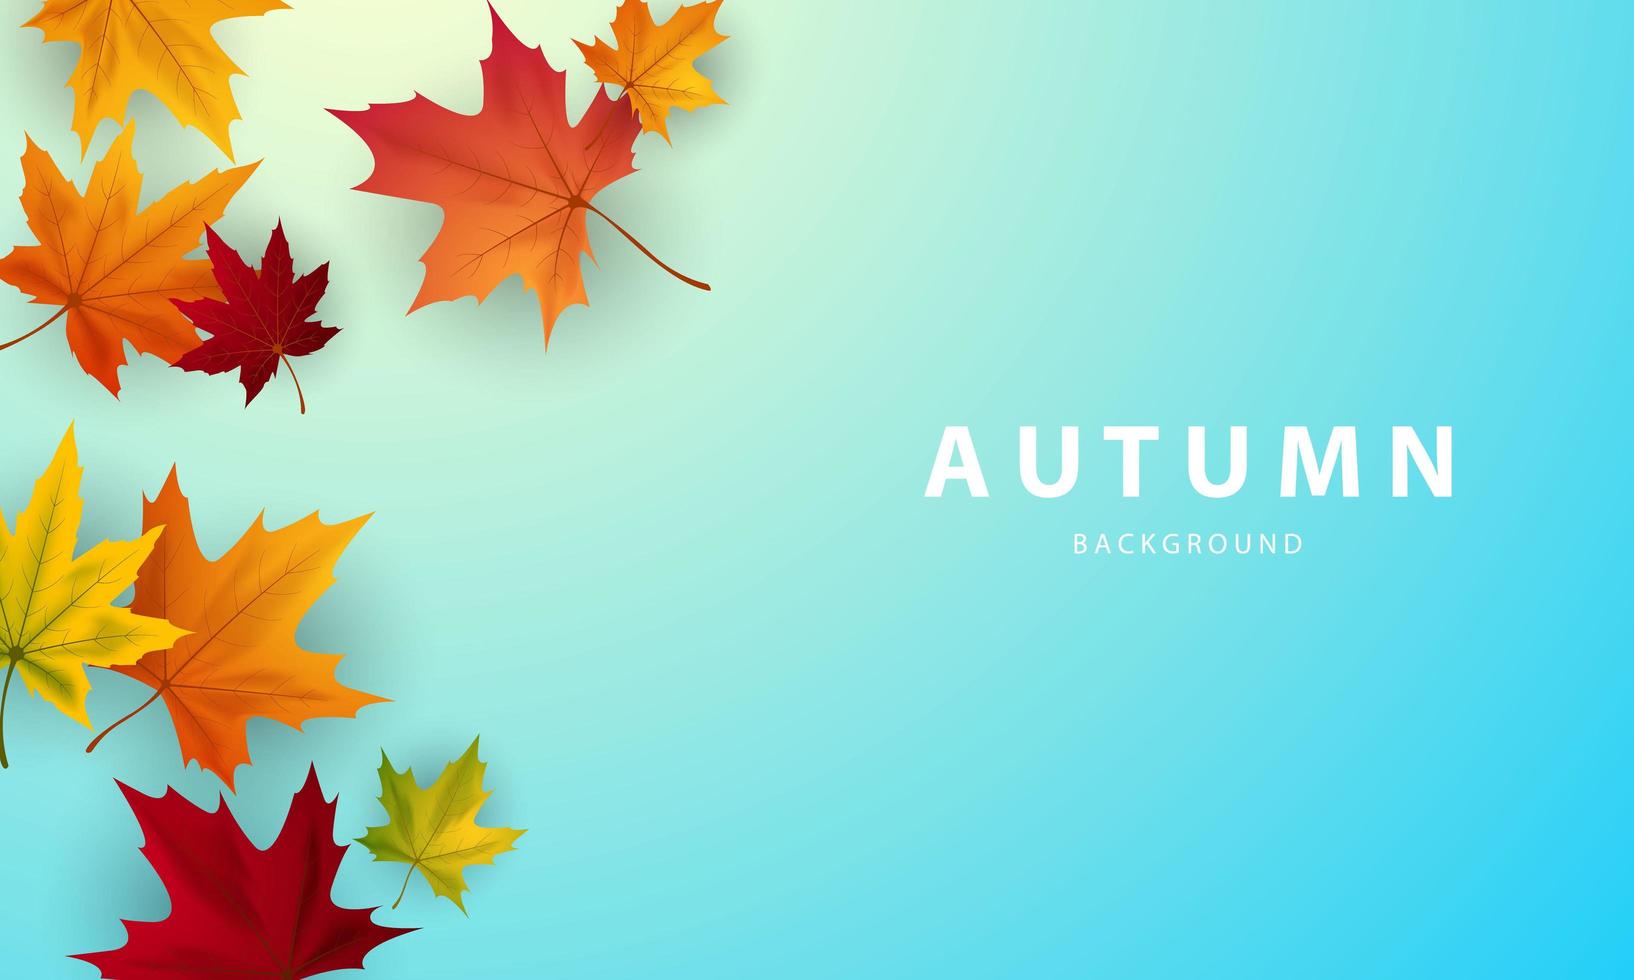 Autumn poster with falling leaves border vector